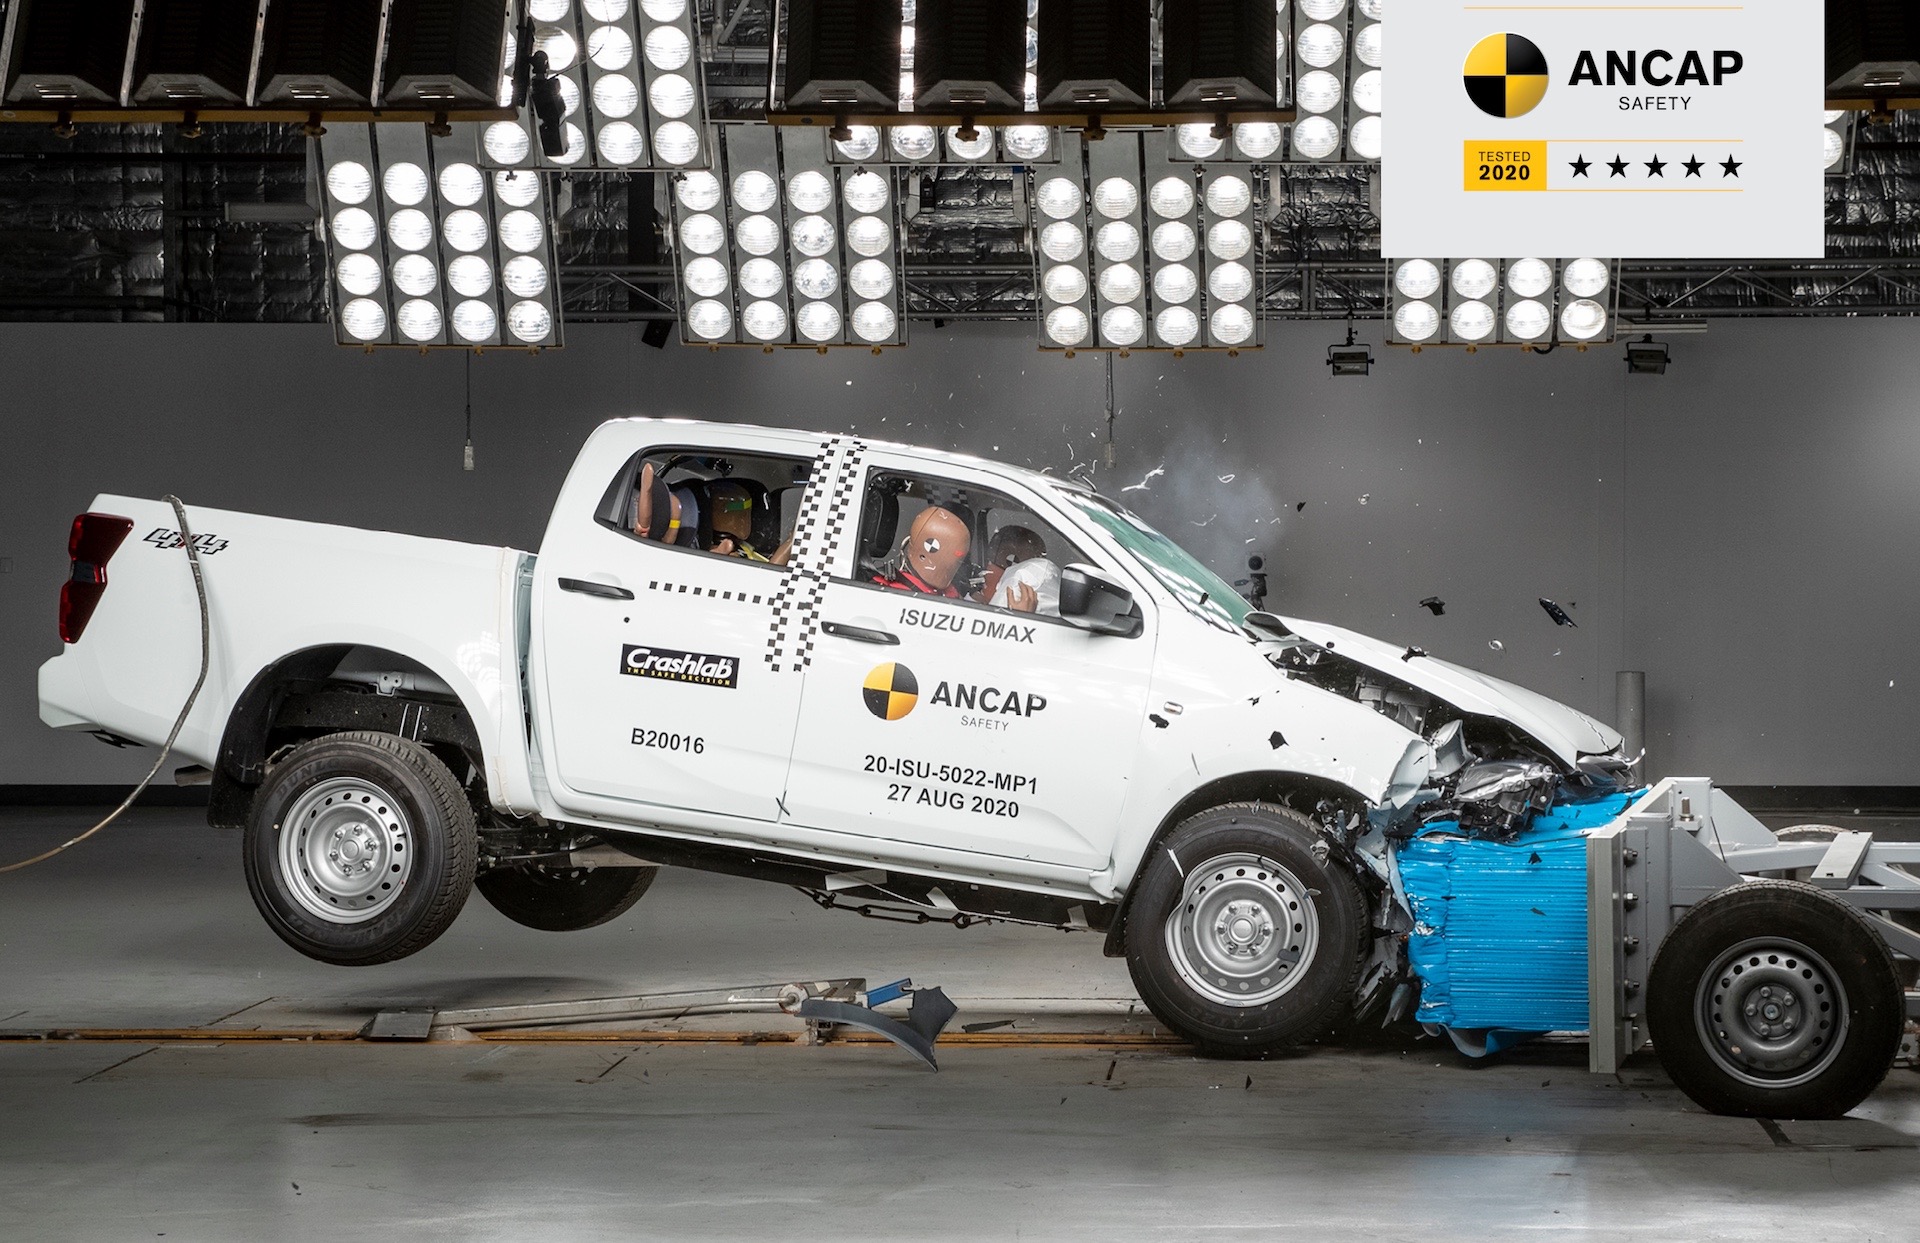 2021 Isuzu D-Max awarded 5-star ANCAP safety rating (video)